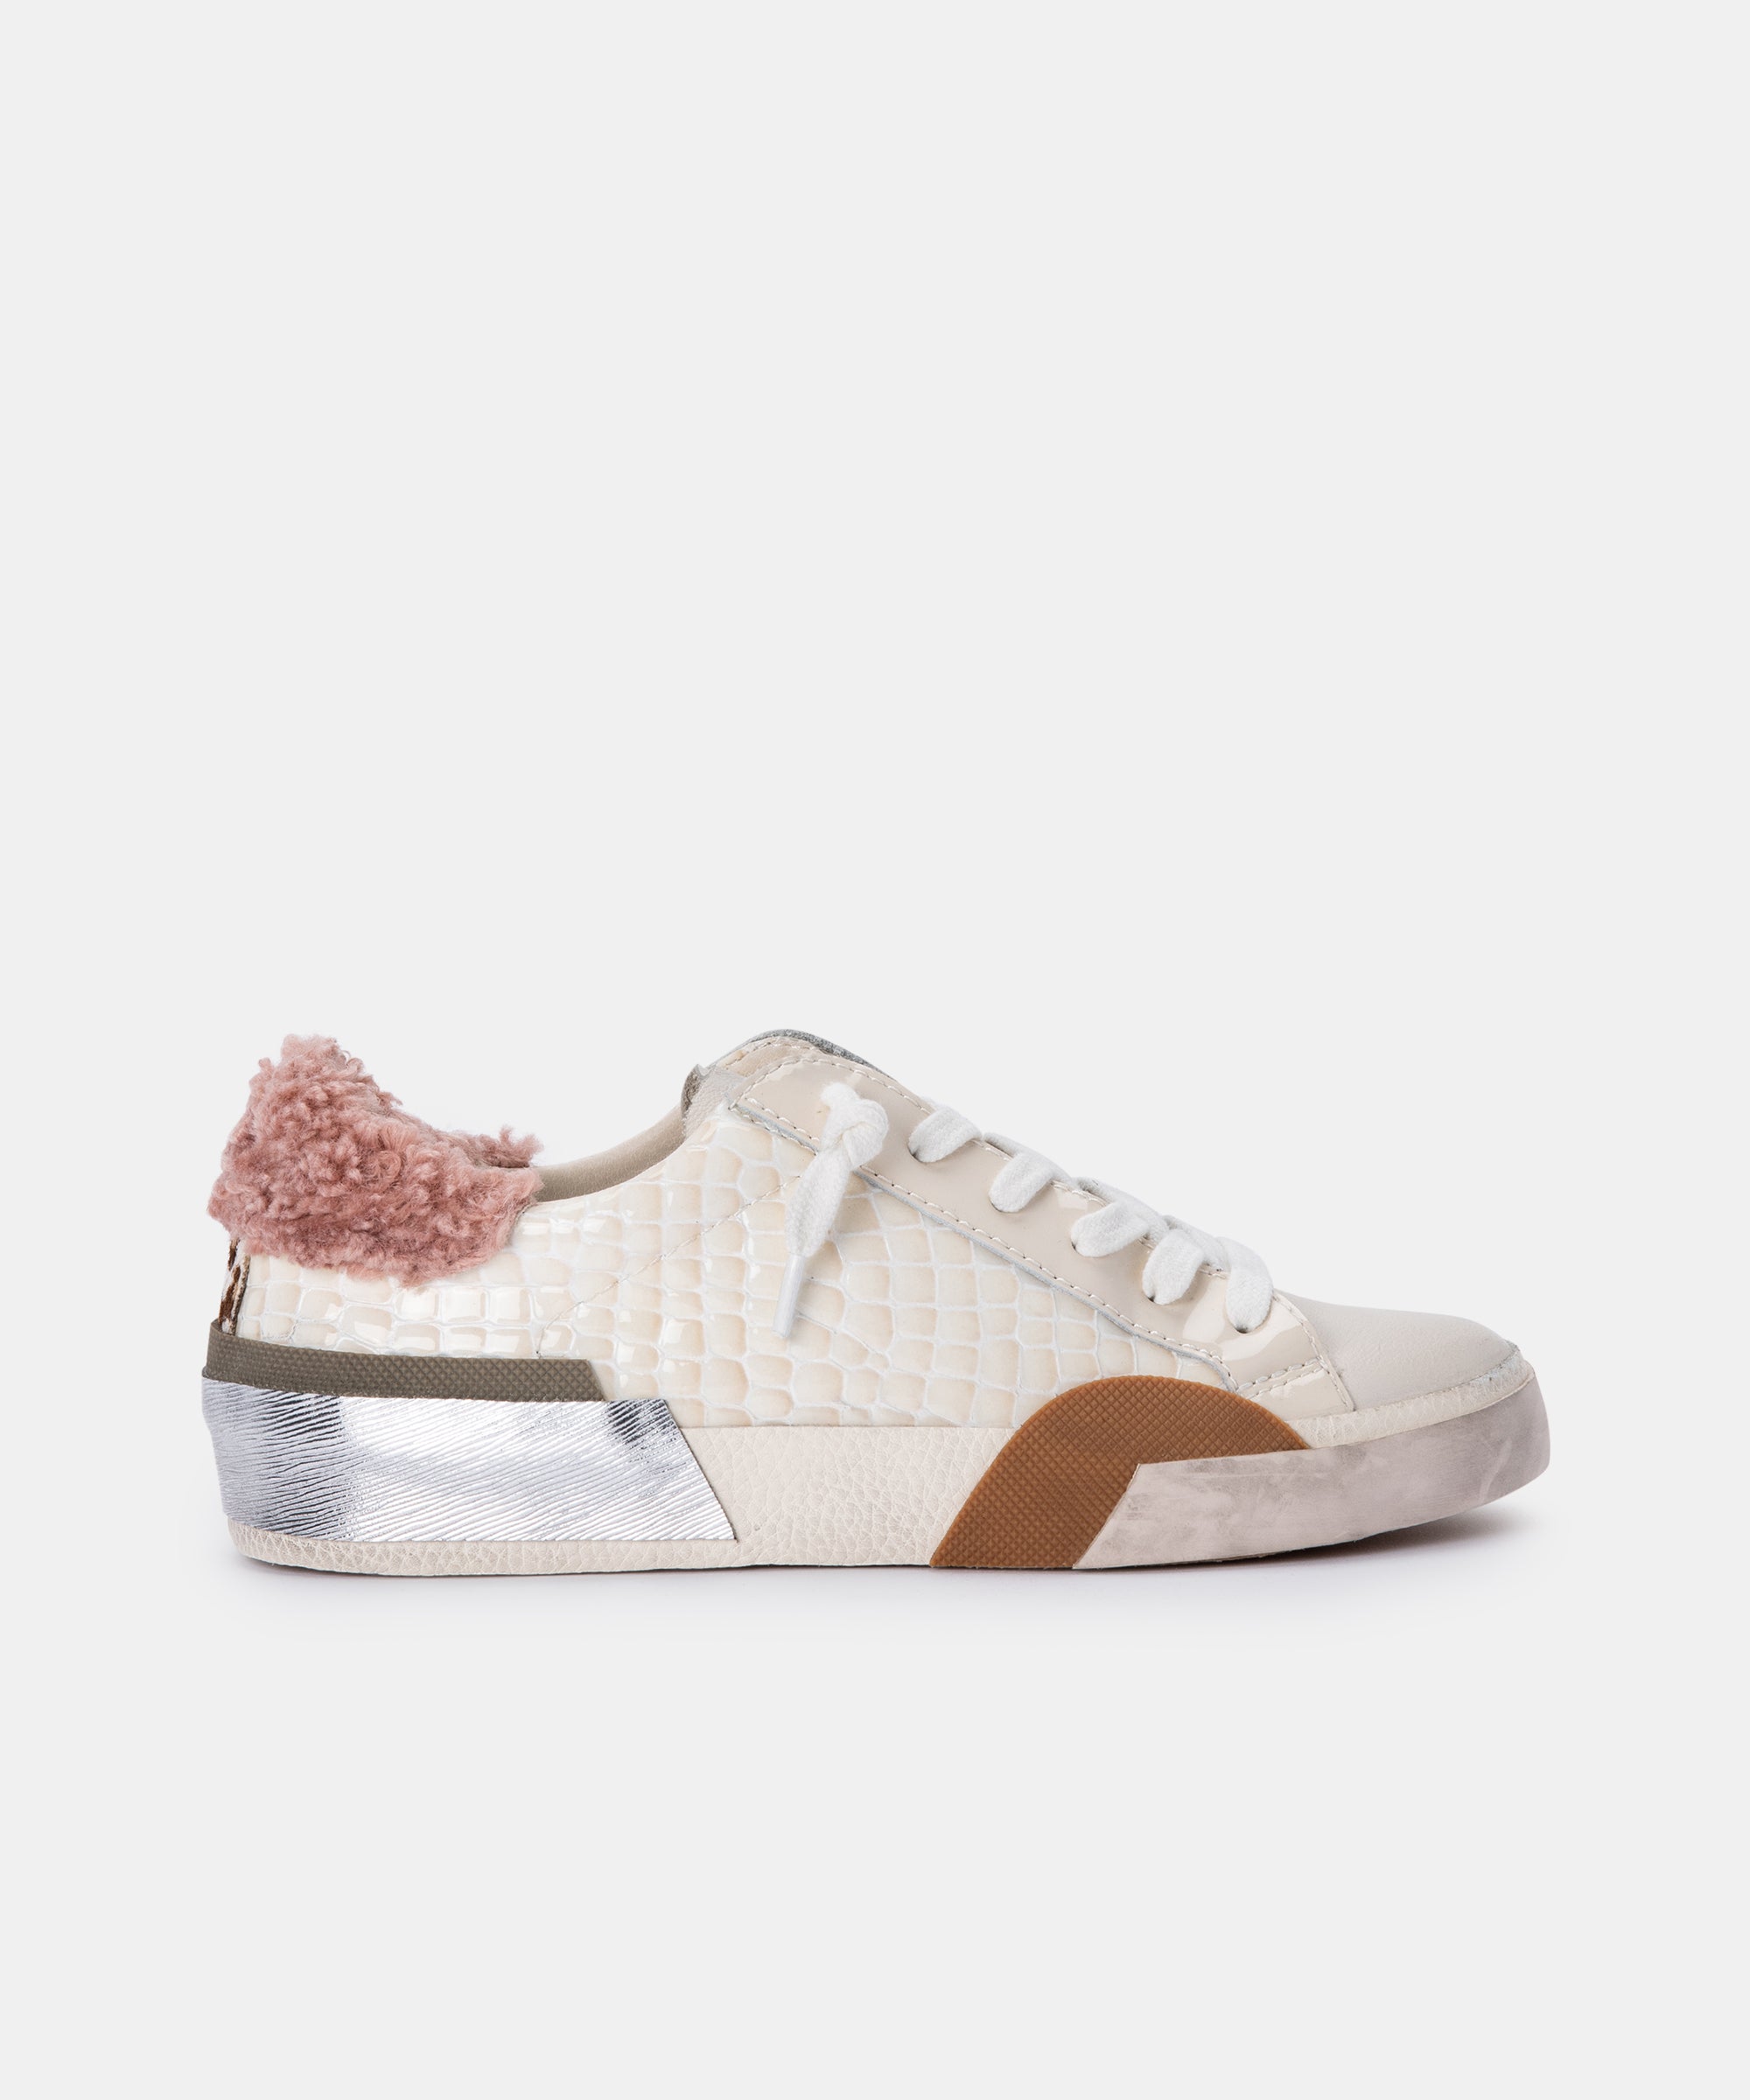 dolce vita leather sneakers